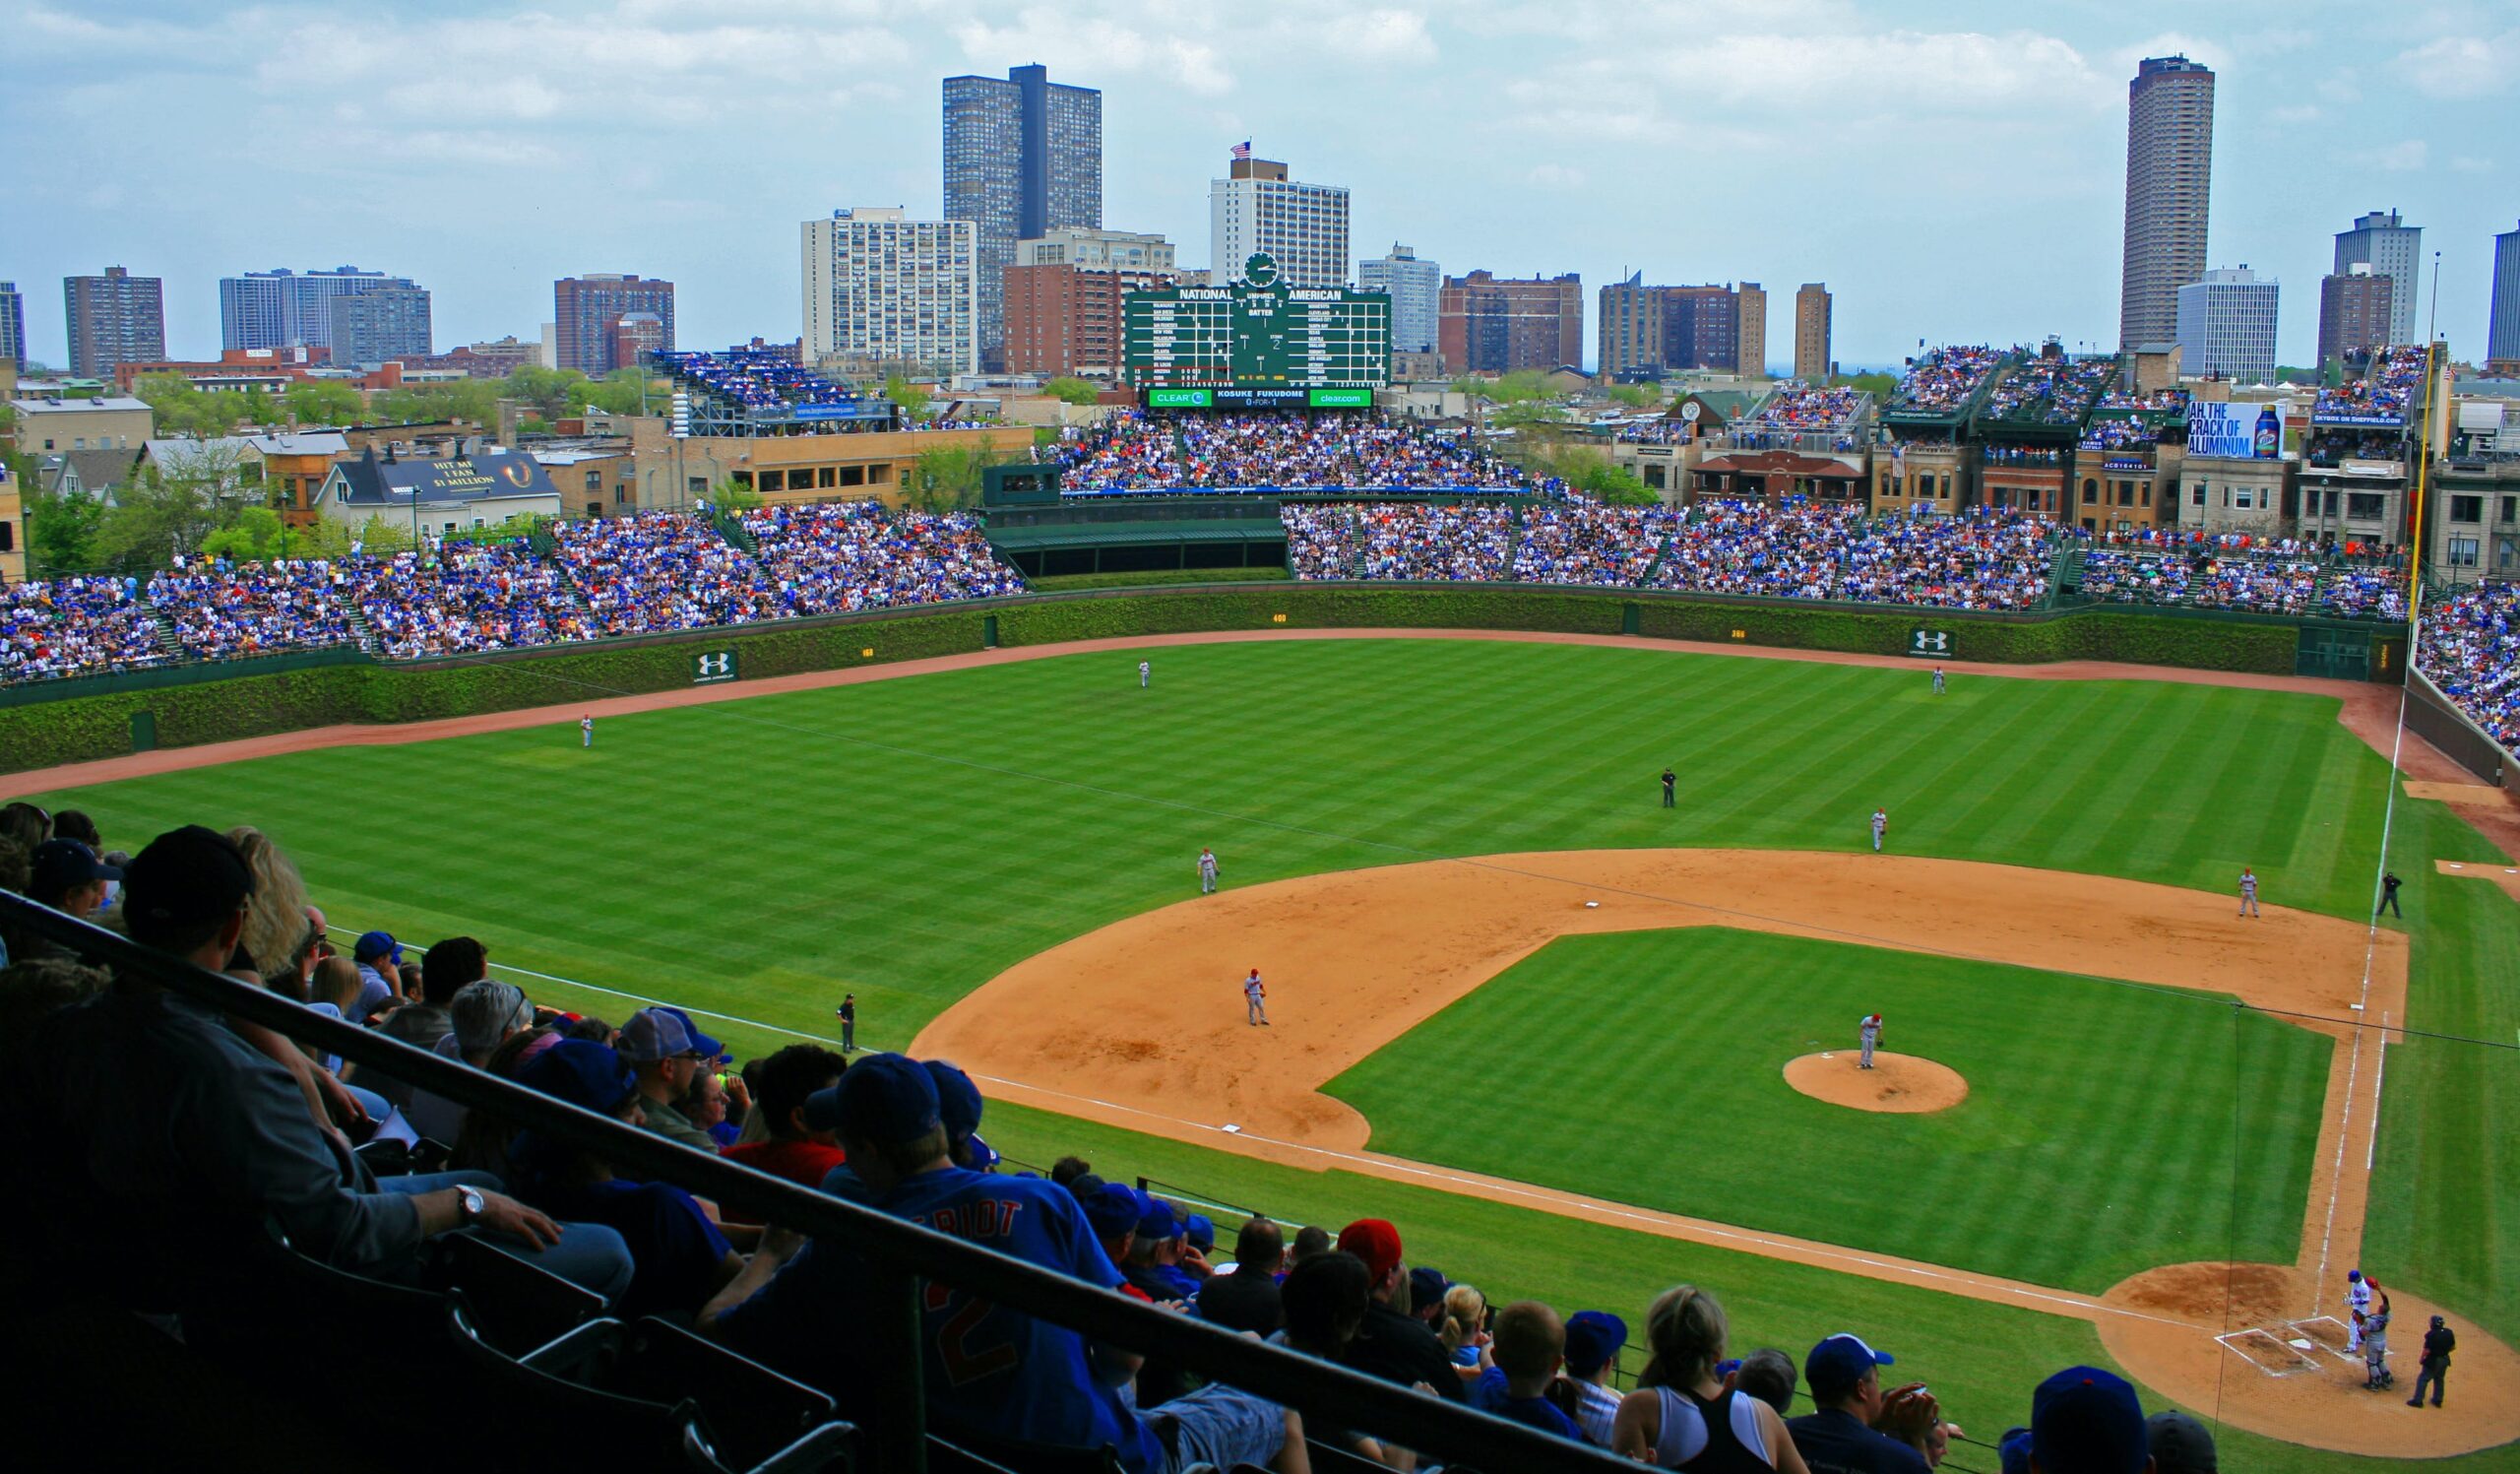 Chicago’s Unmissable Attractions, Diverse Neighborhoods, and the Iconic Wrigley Field